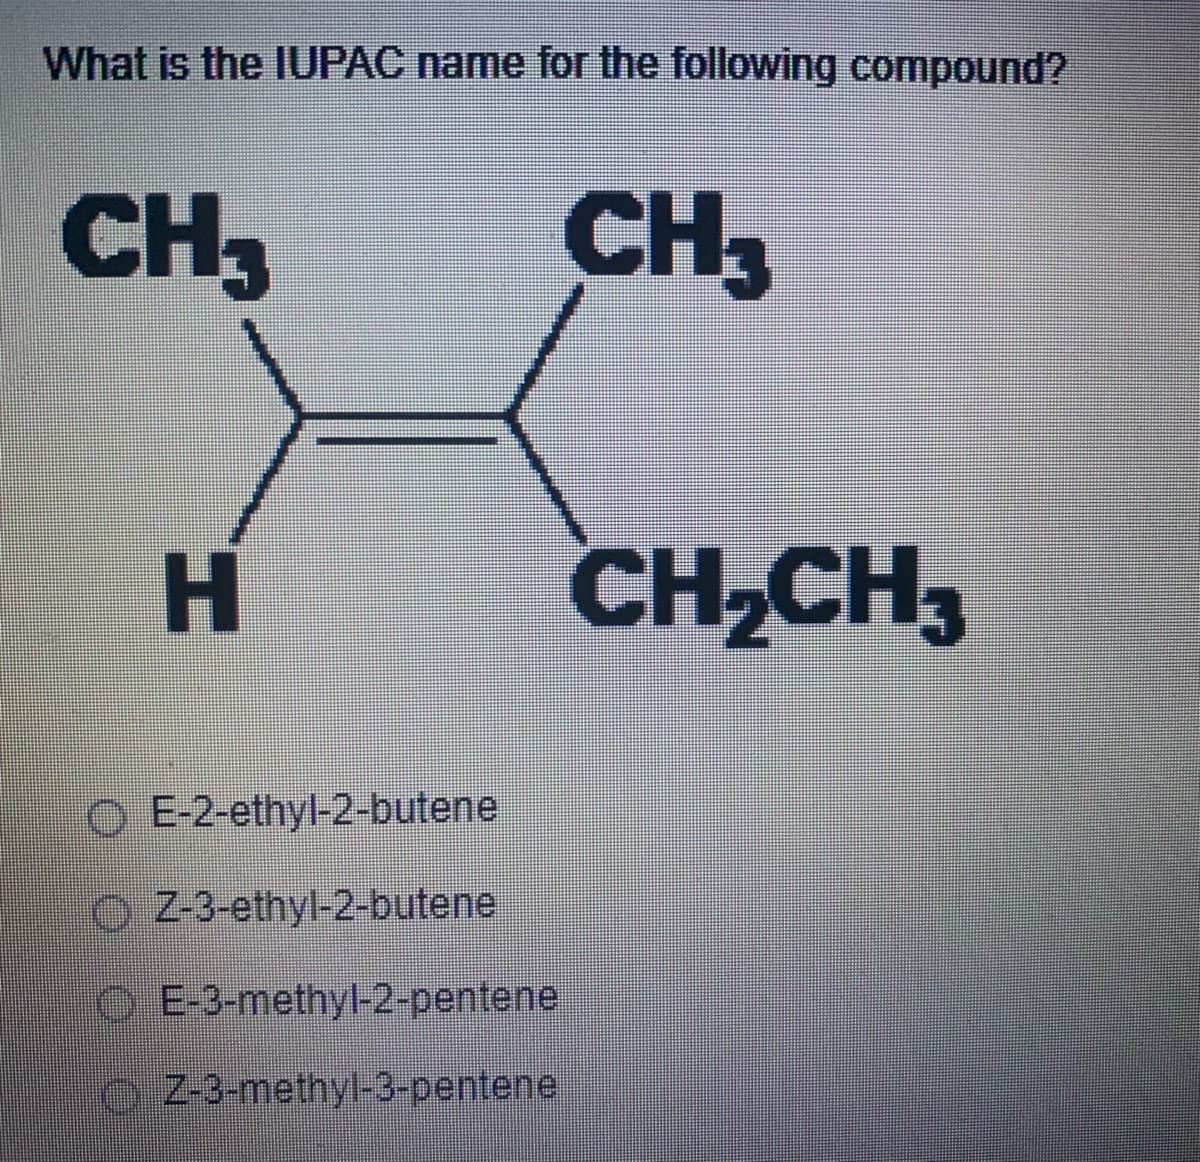 What is the IUPAC name for the following compound?
CH3
CH3
H.
CH CH,
O E-2-ethyl-2-butene
O Z-3-ethyl-2-butene
O E-3-methyl-2-pentene
oZ-3-methyl-3-pentene
